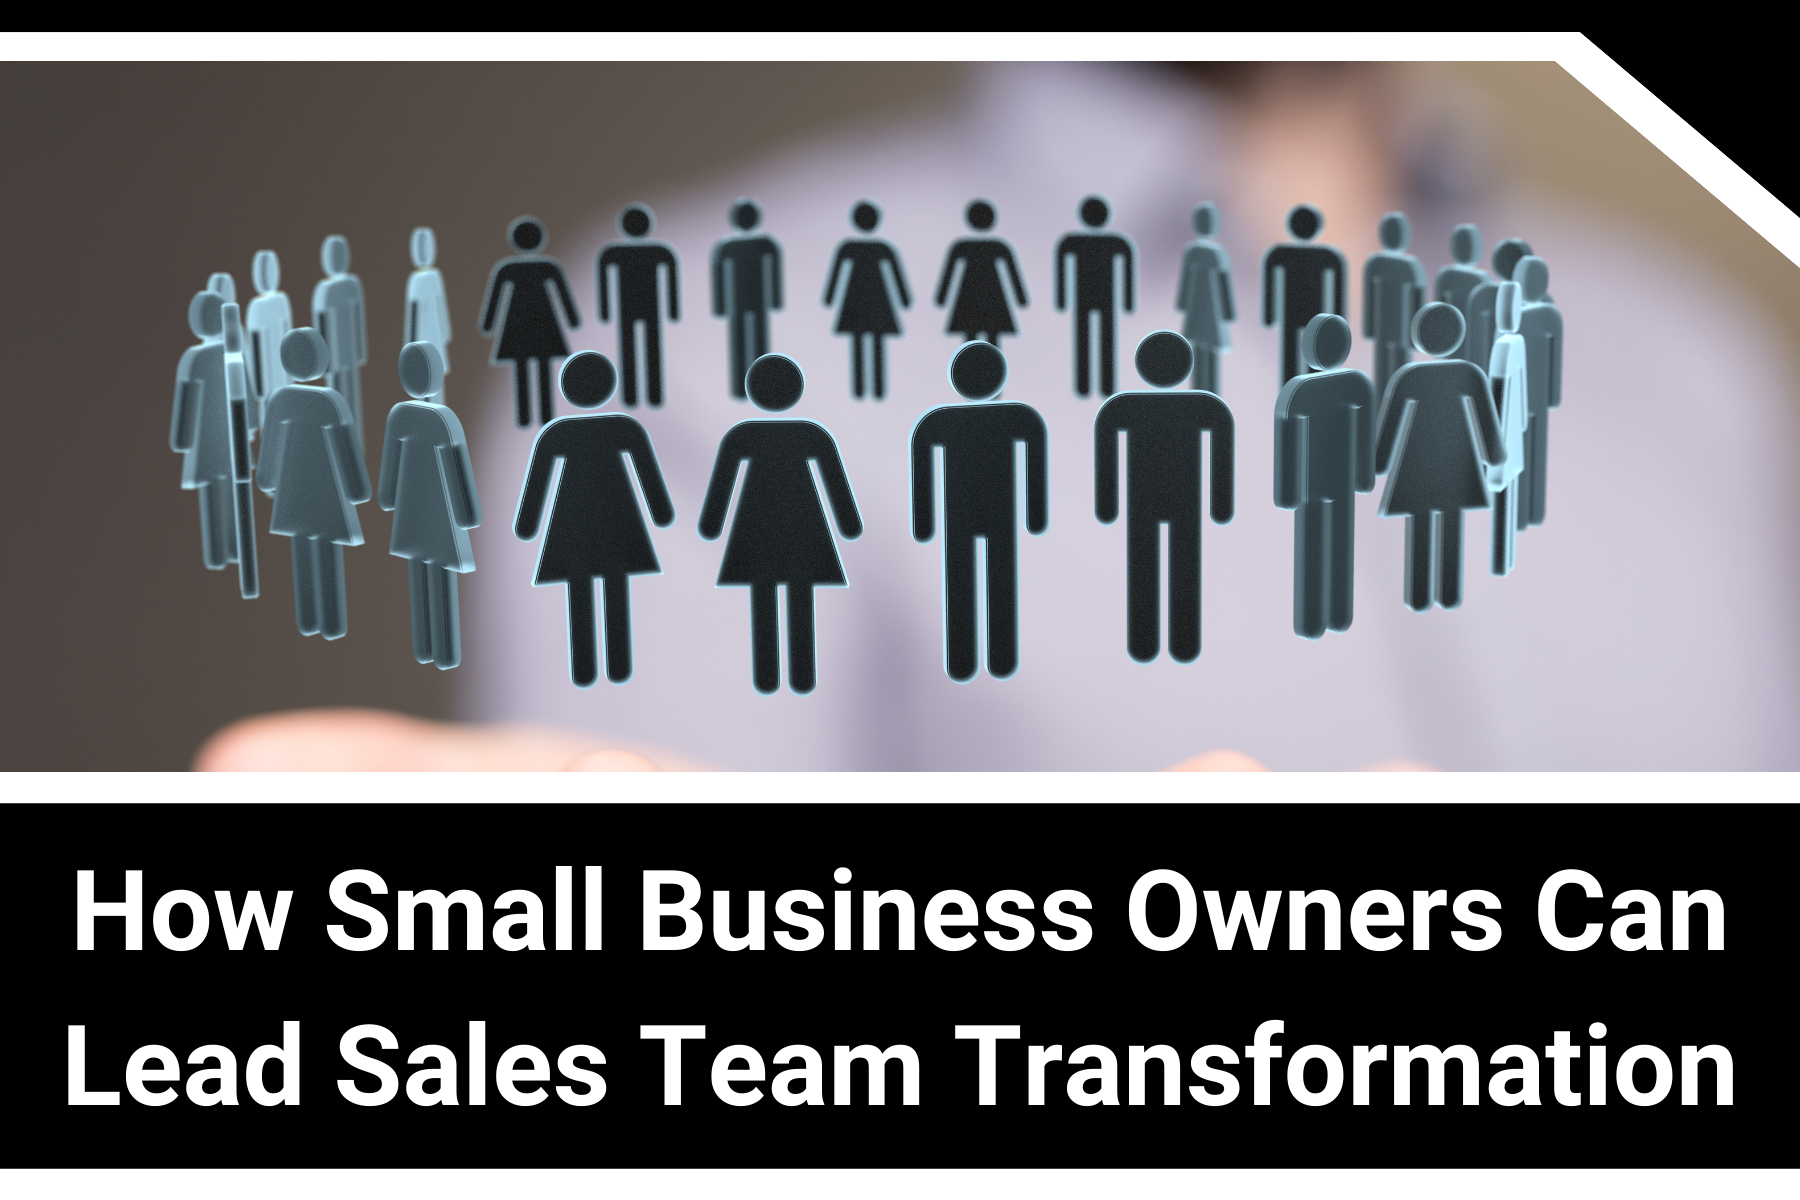 How Small Business Owners Can Lead Sales Team Transformation